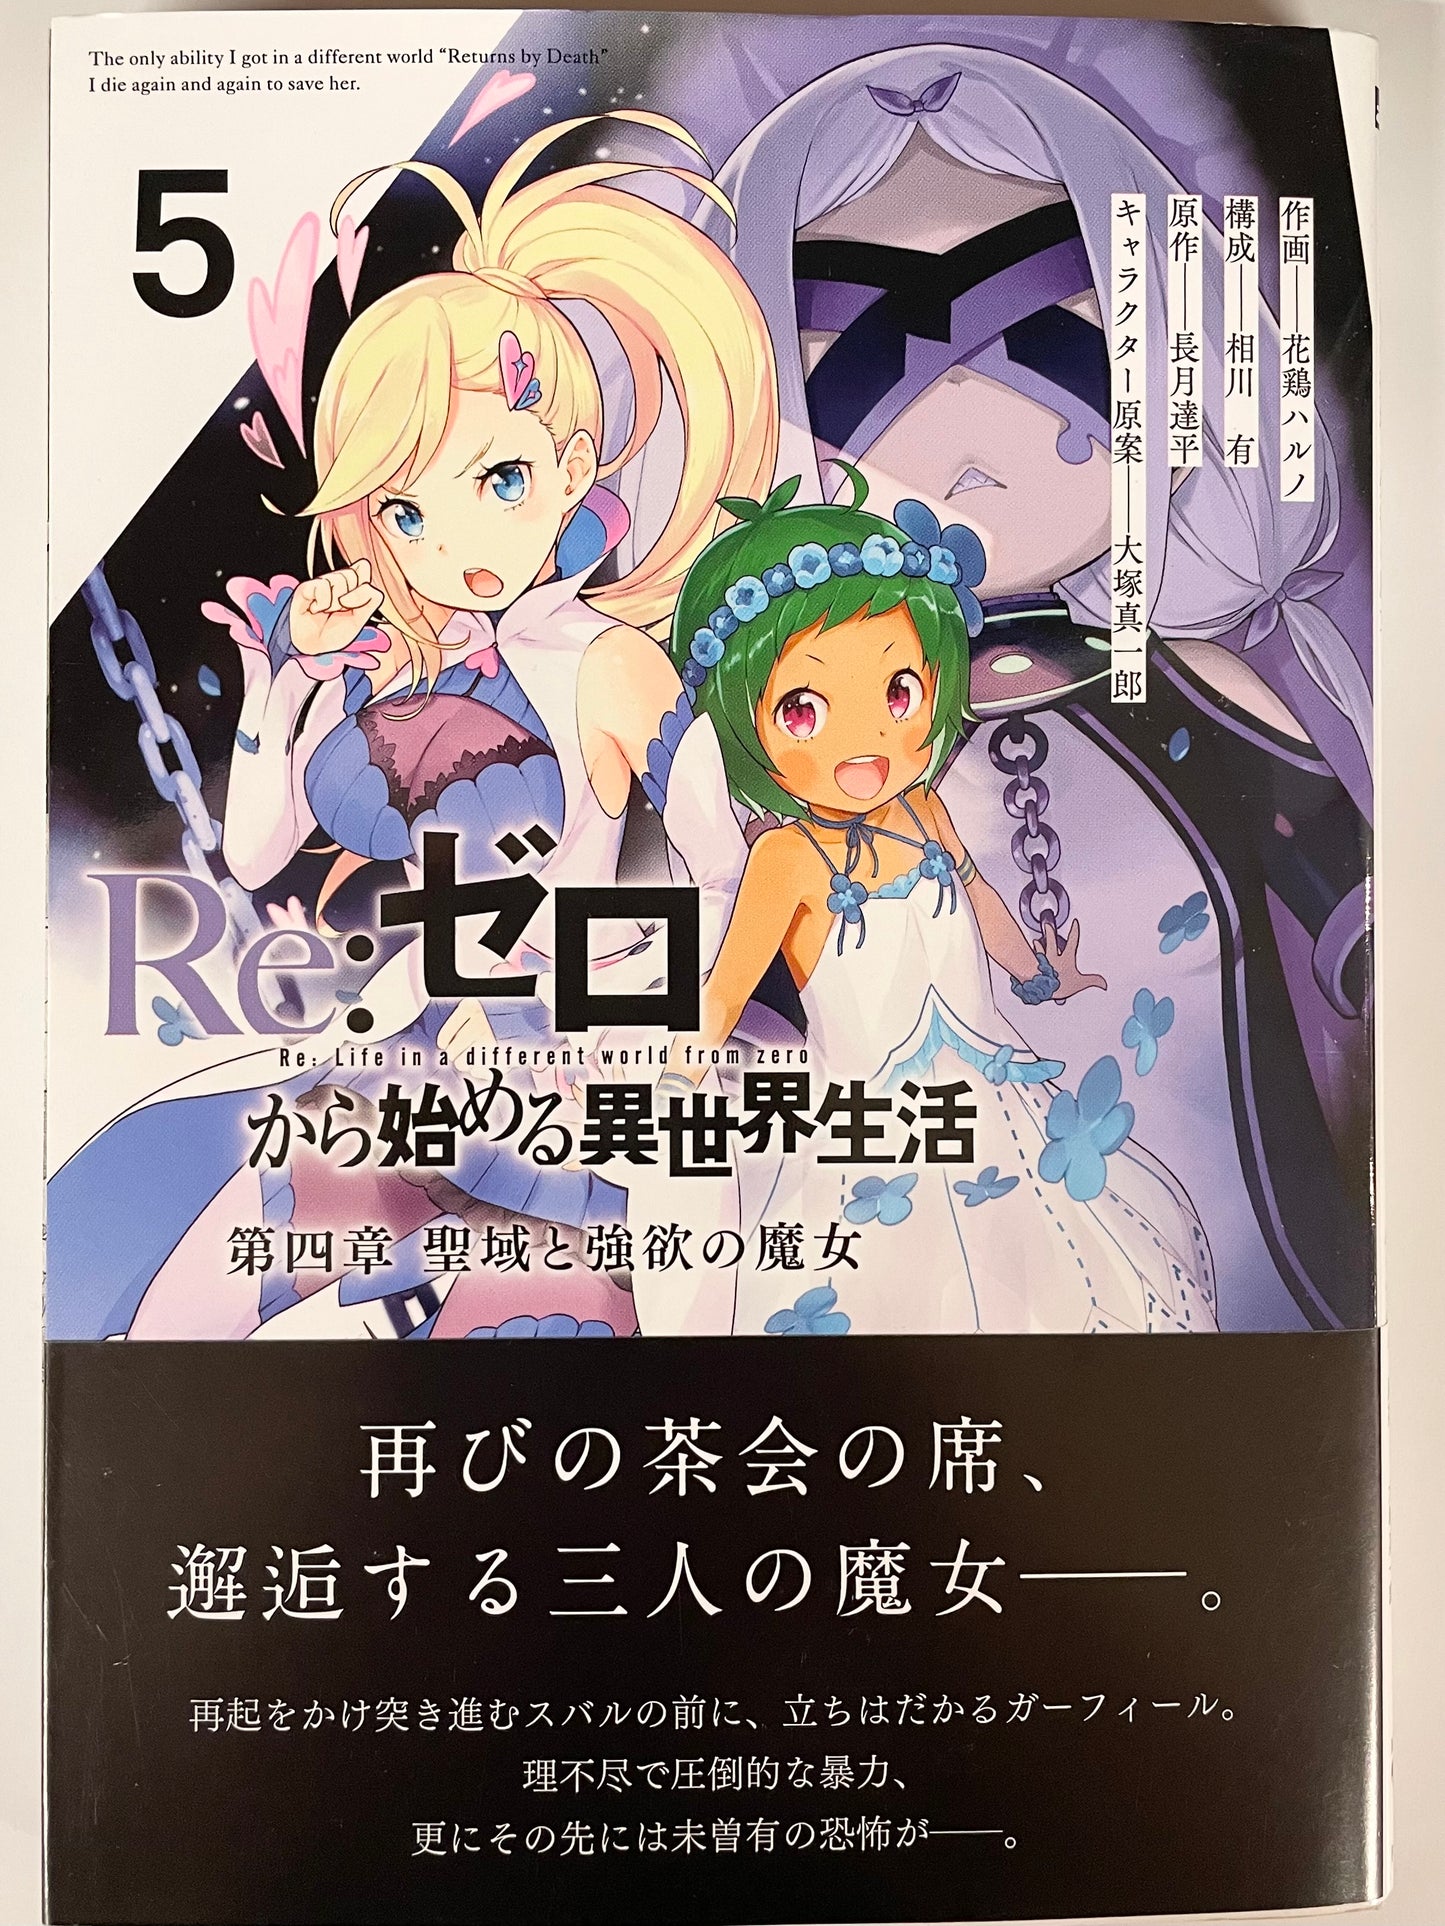 Re:Zero Ep-4 Vol.5-Starting Life In Another World-Official Japanese Edition